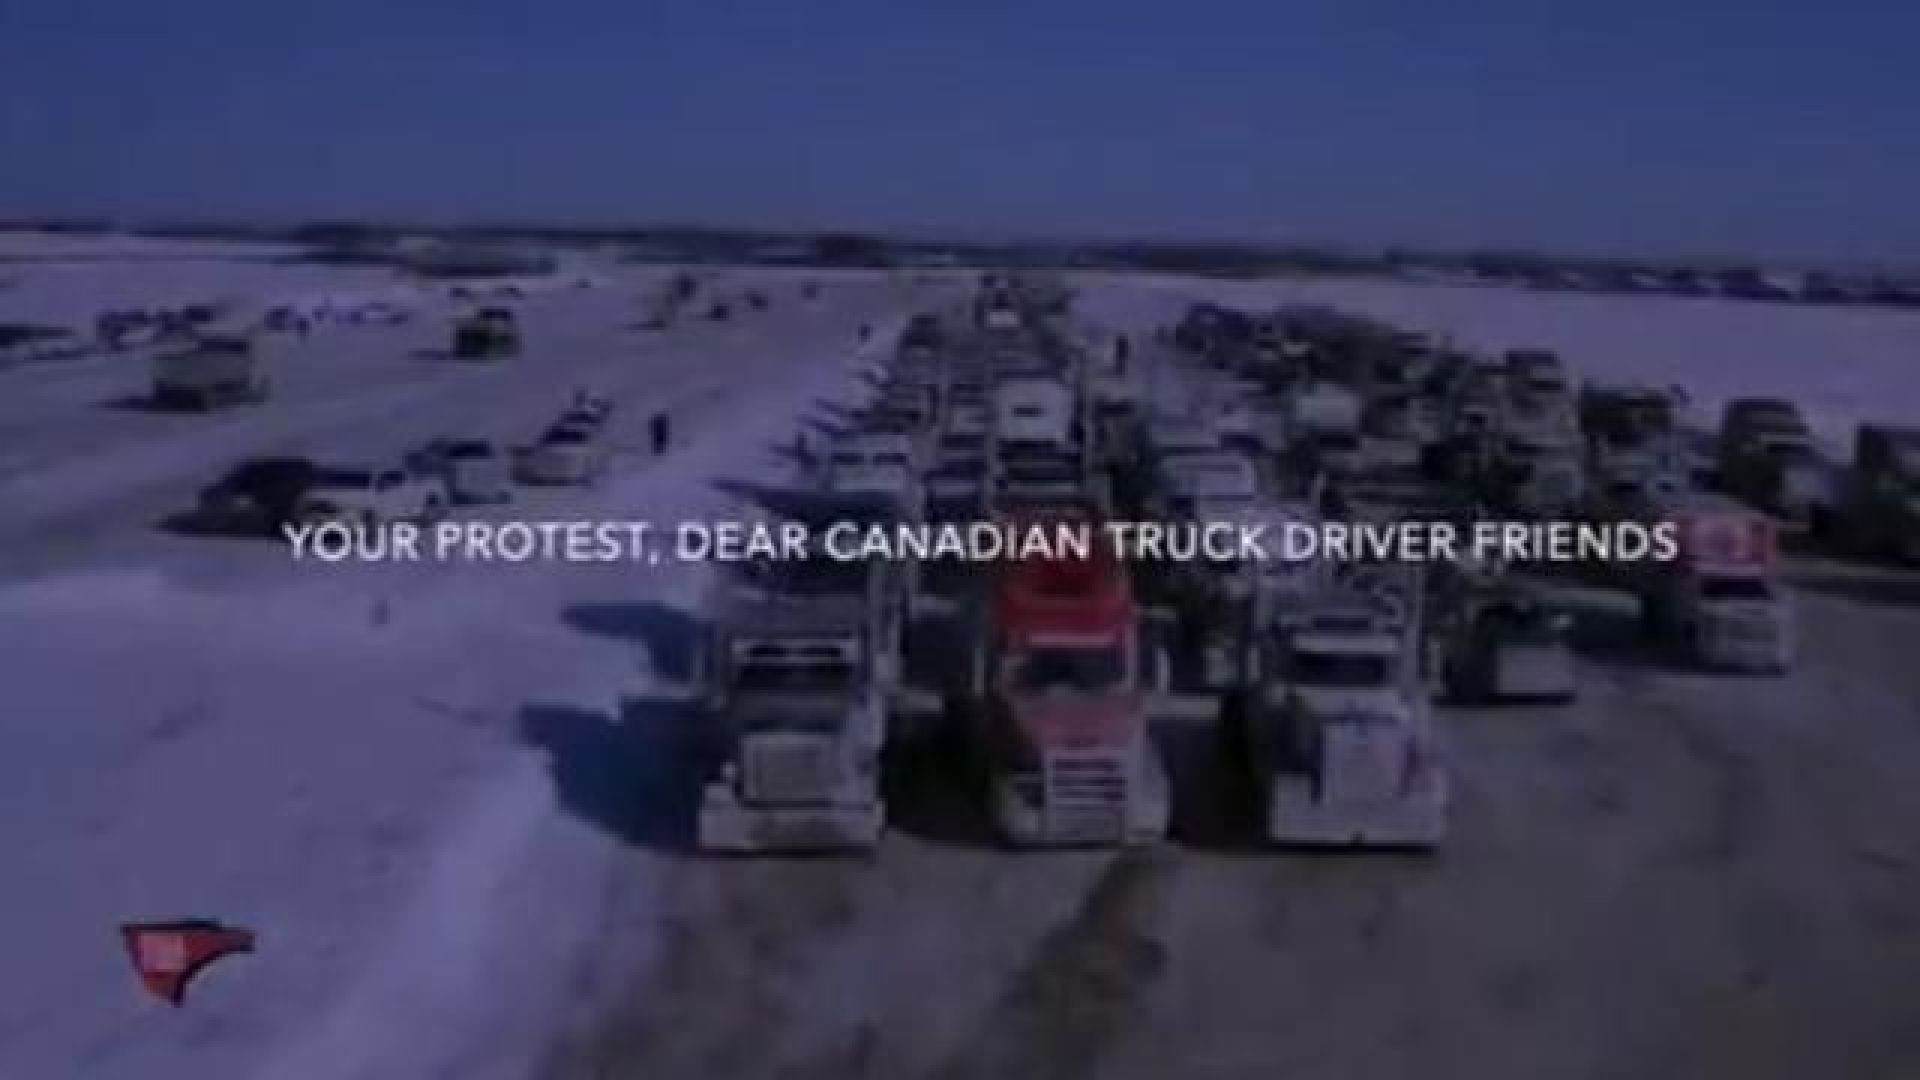 ⁣ARCHBISHOP VIGANOS' MESSAGE TO THE CANADIAN TRUCKERS AND THE WORLD